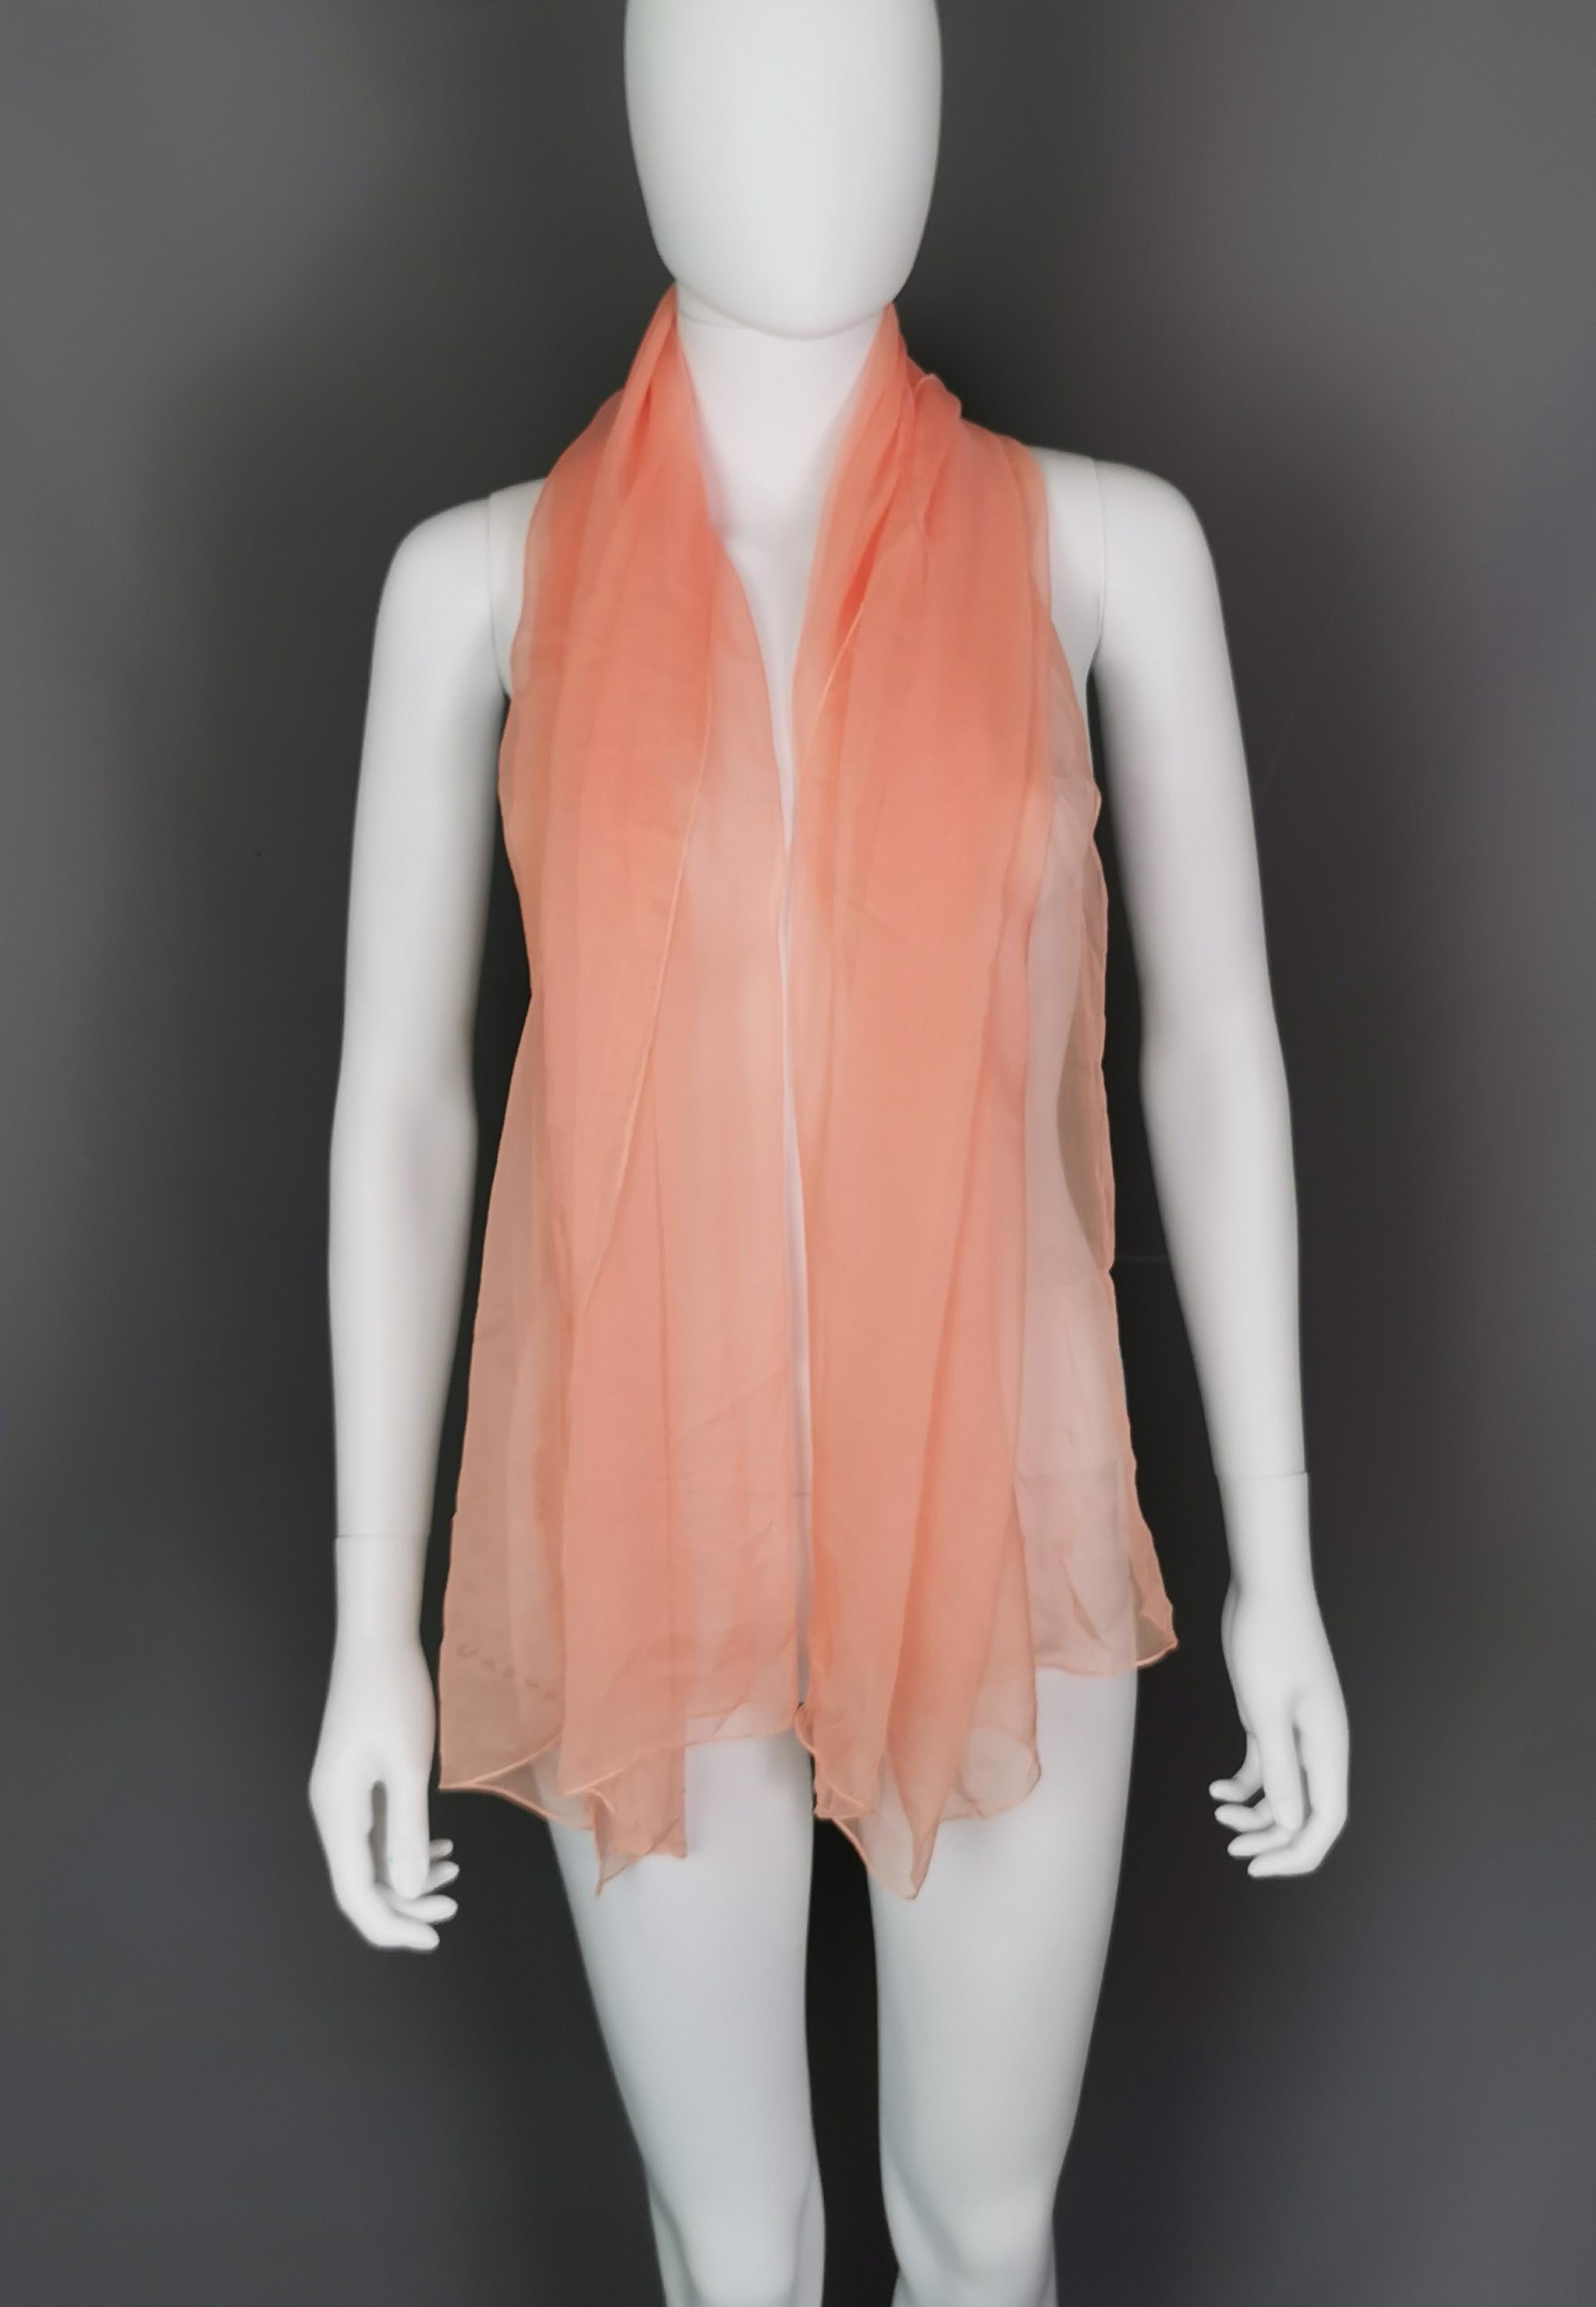 A very attractive vintage silk chiffon scarf by Jaeger.

It is a long length and a lightweight, floaty scarf, very pretty and the most gorgeous peach colour, it has a reddish printed logo on one end.

A beautiful piece and versatile too, can be used